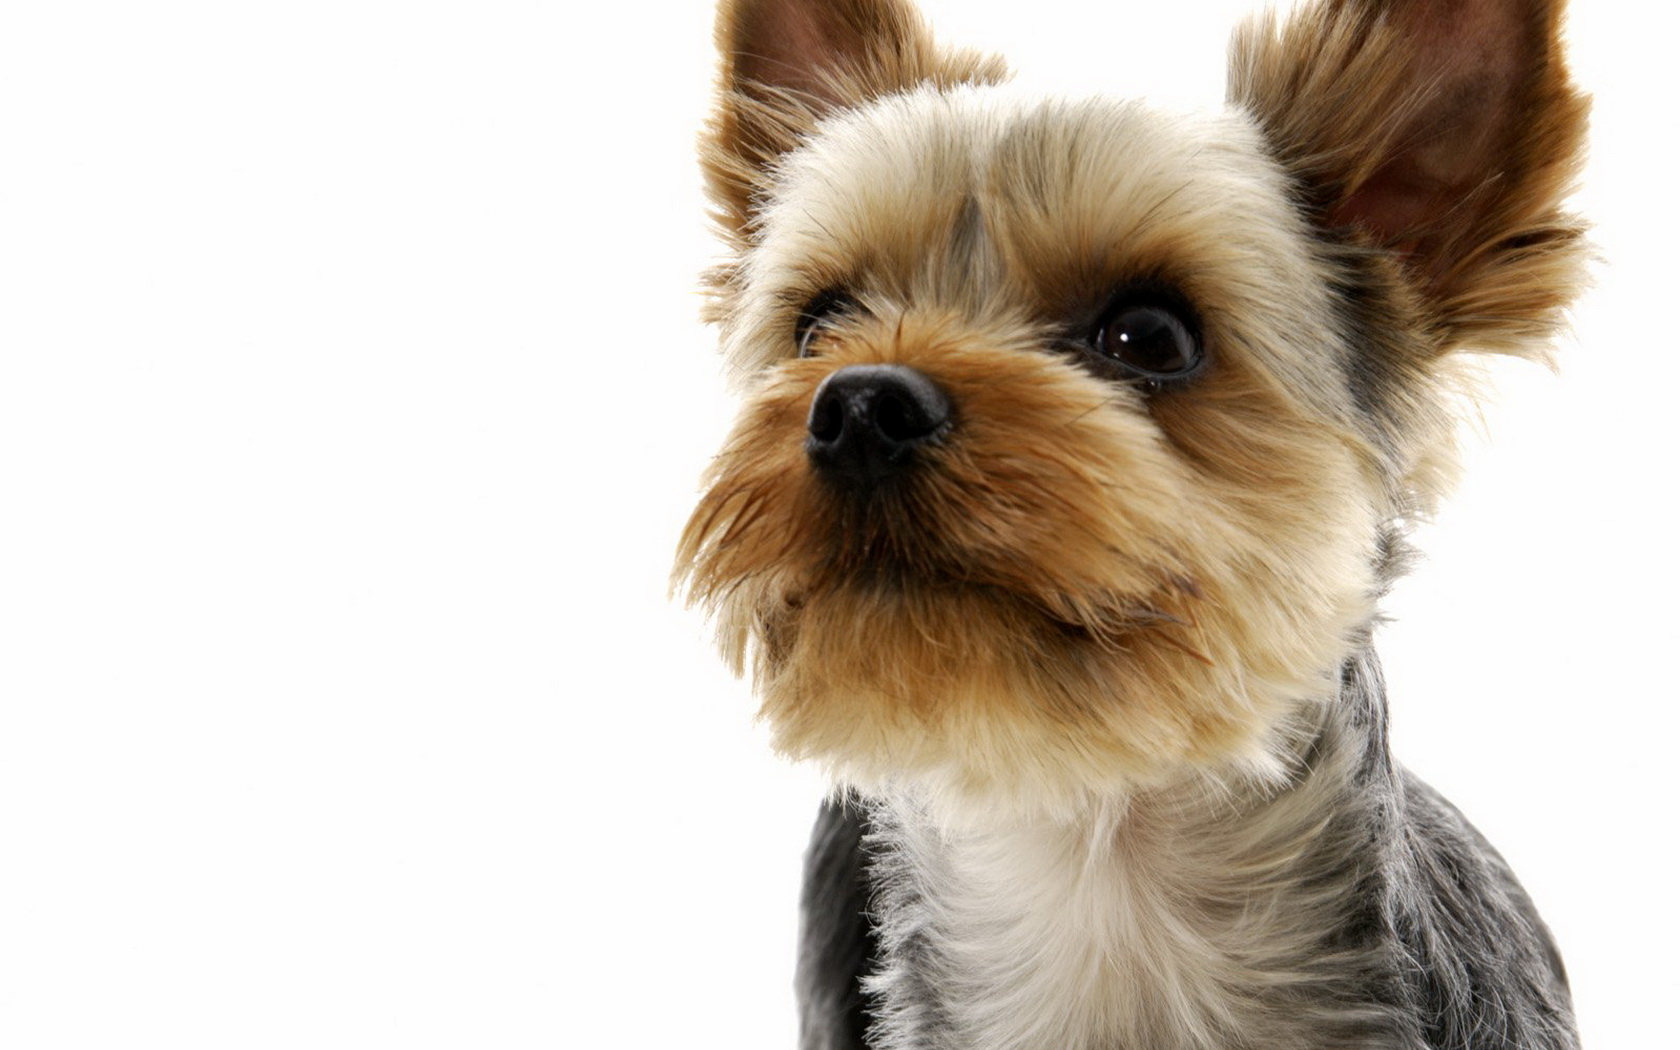  Puppies Wallpapers Yorkie Puppies Photos Pictures Free Wallpaper